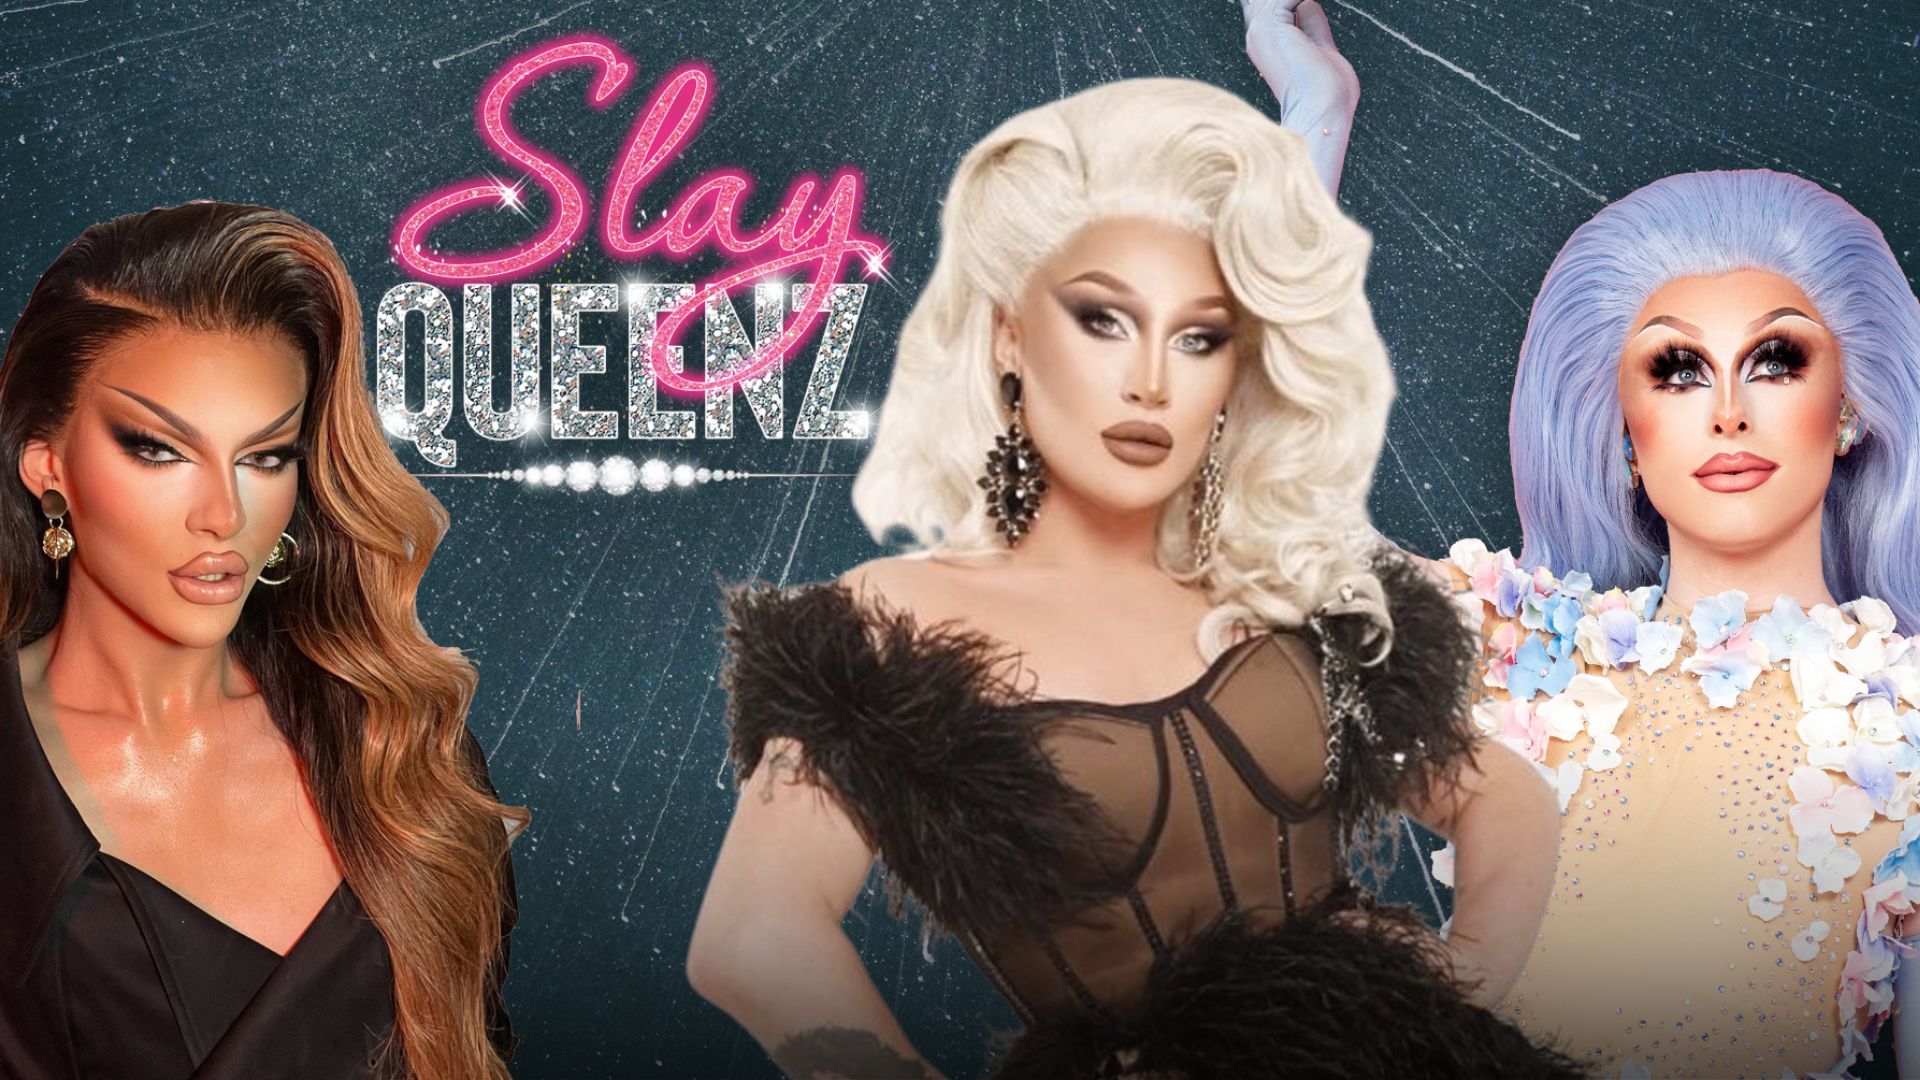 Slay Queenz promotional image - In drag, from left to right: Krystal Versace, The Vivienne and Blu Hydrangea.